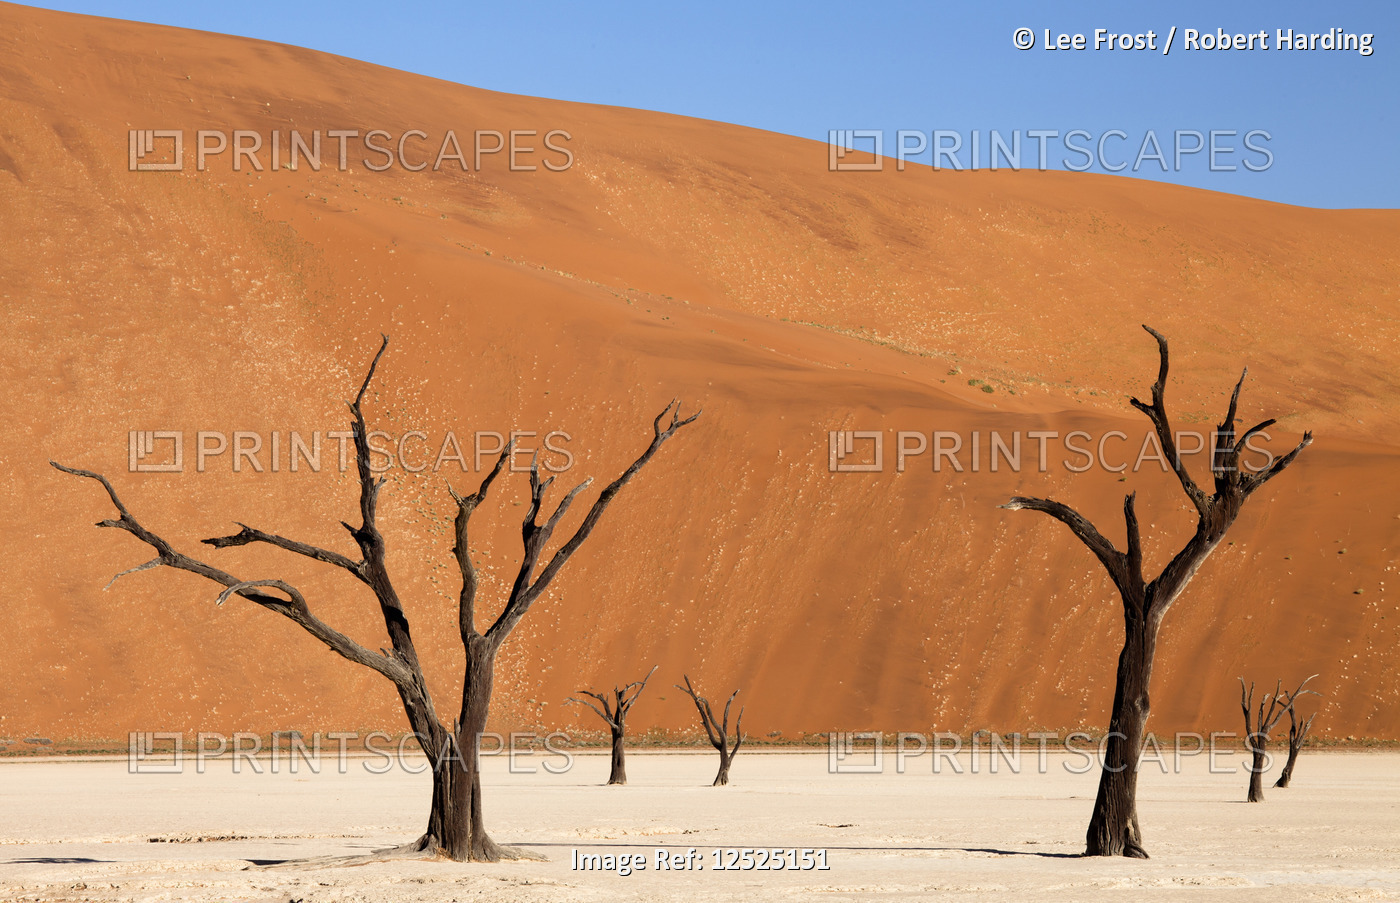 Dead camelthorn trees said to be centuries old against the towering orange sand dunes of the Namib D